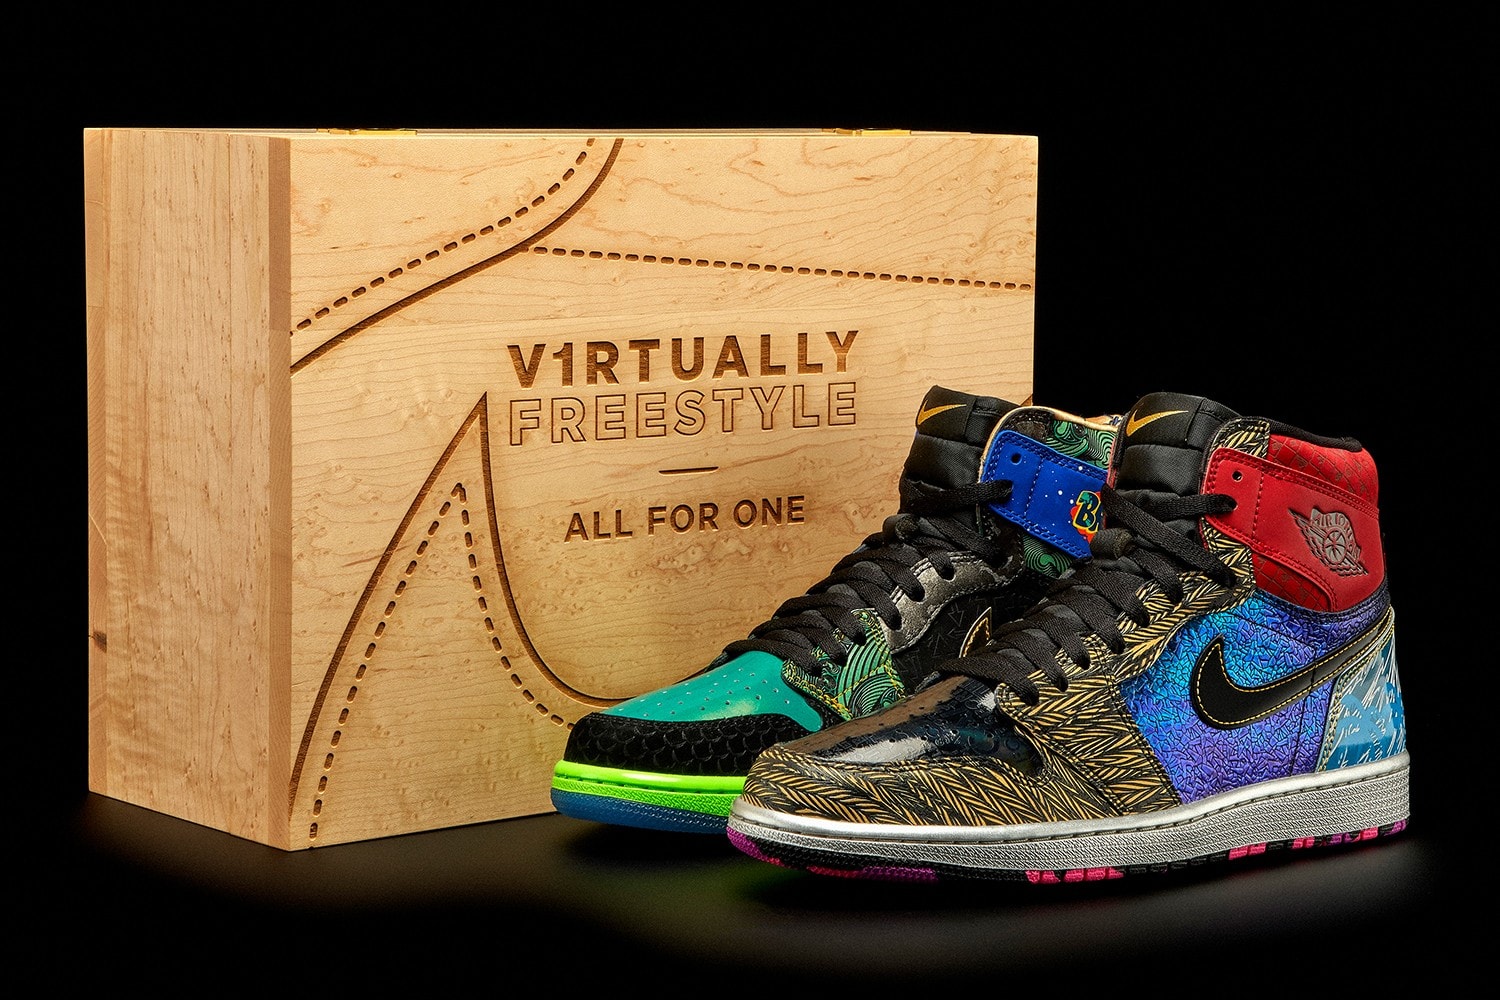 Nike Doernbecher Freestyle Air Jordan 1 Retro High OG What The Auction Suspicious Bidding Halted Info Official Look Release Buy Price 